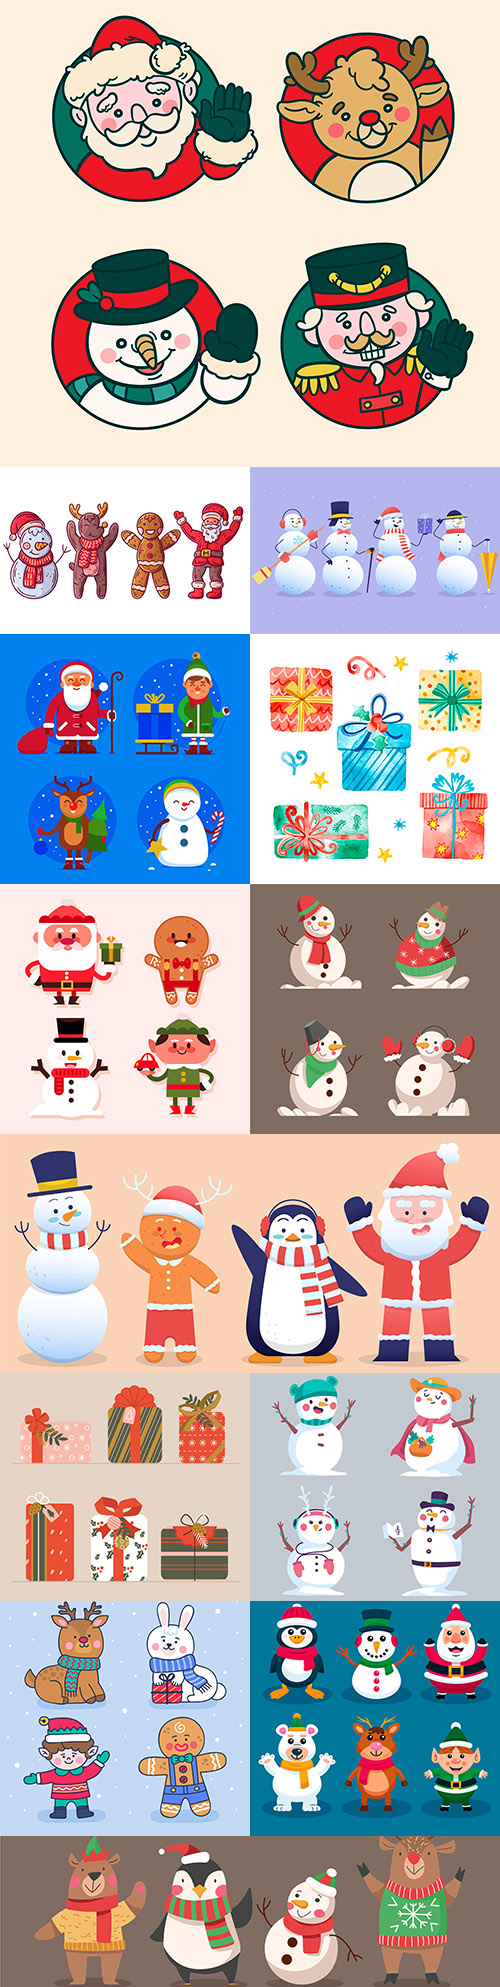 Christmas characters and gifts in flat design collection
